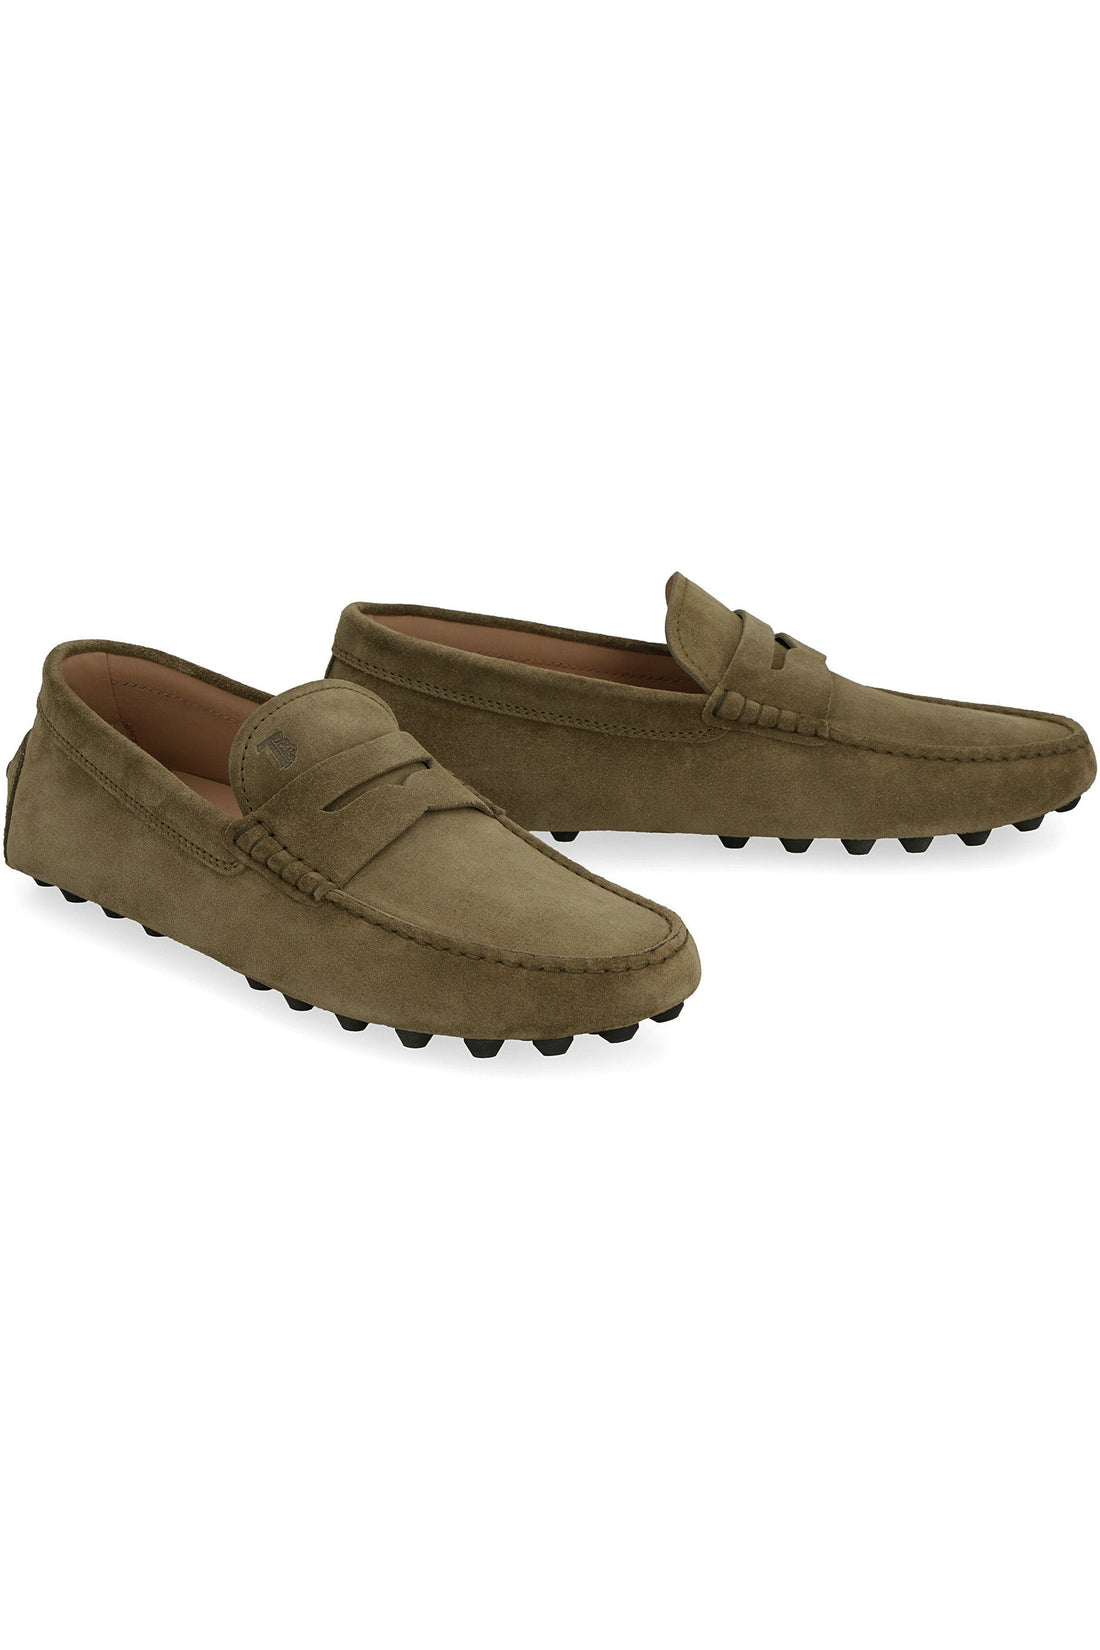 Tod's-OUTLET-SALE-Gommino suede loafers-ARCHIVIST